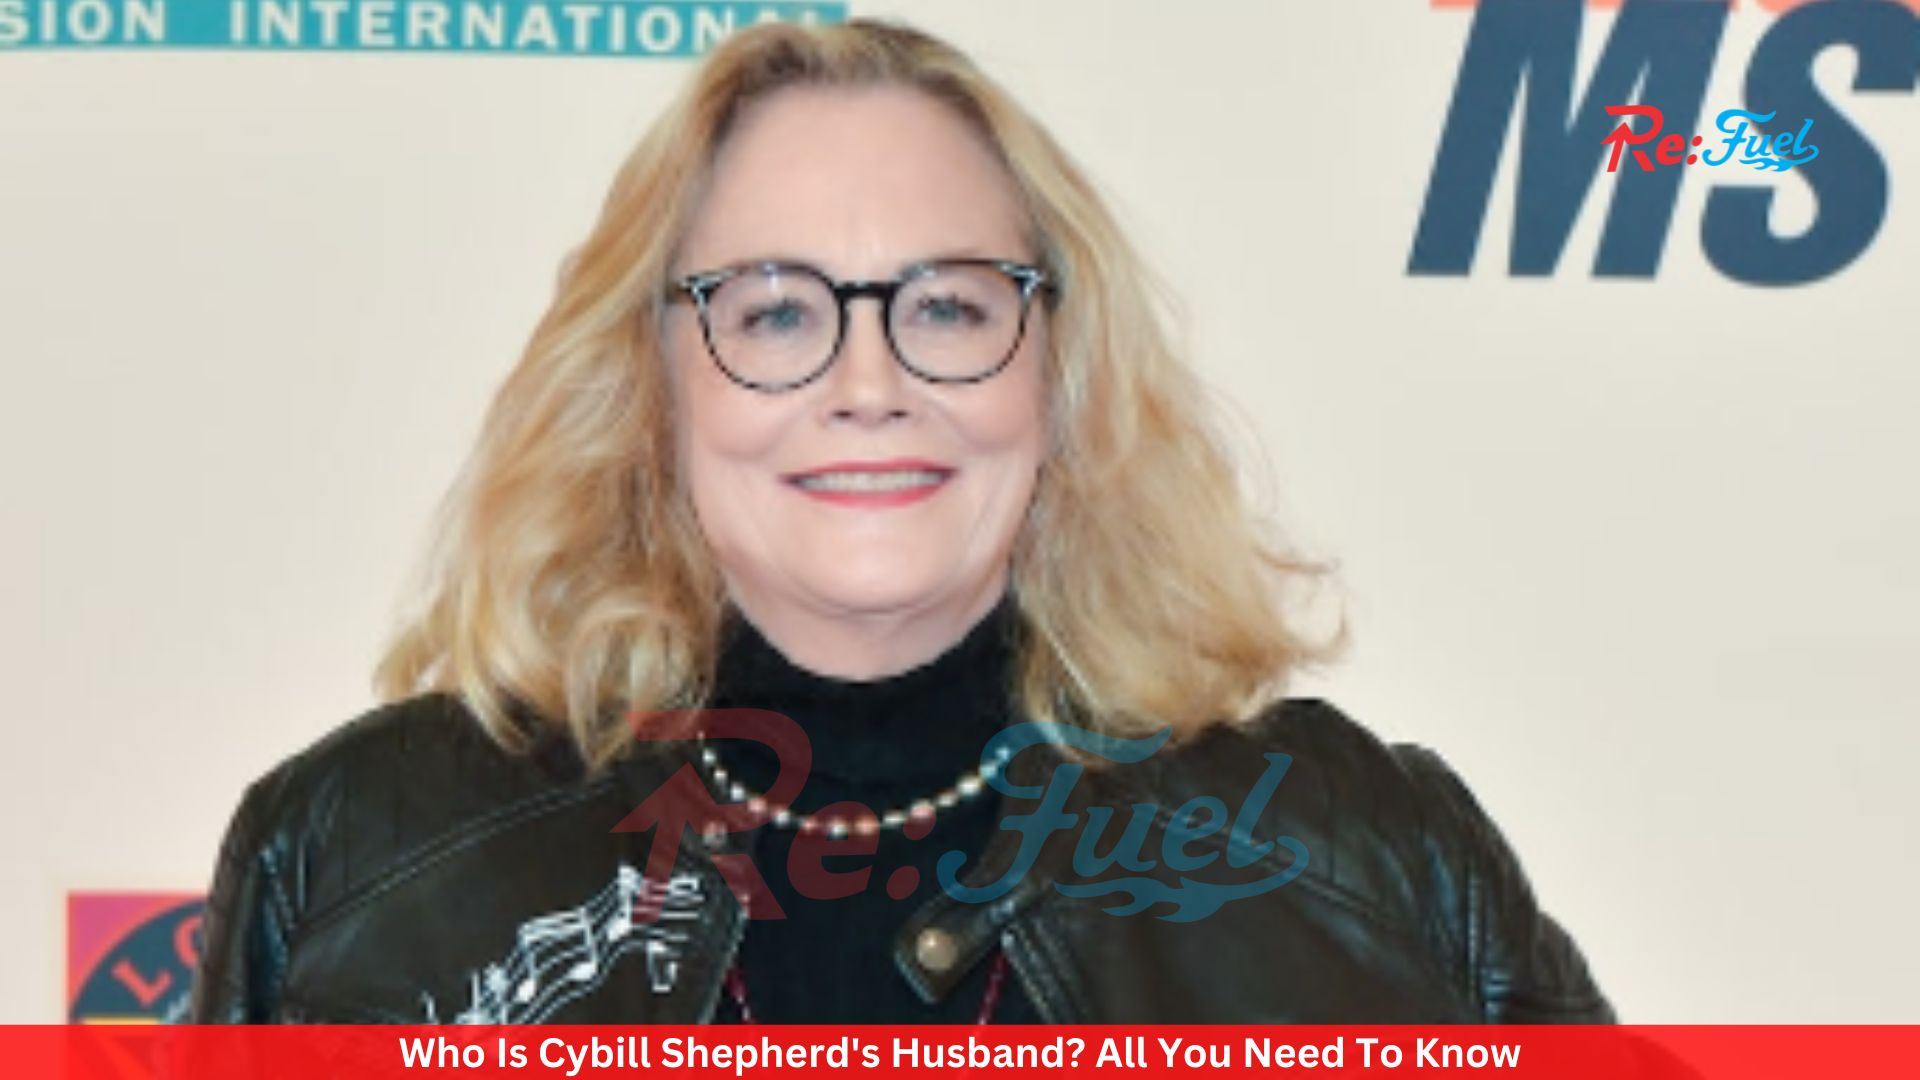 Who Is Cybill Shepherd's Husband? All You Need To Know